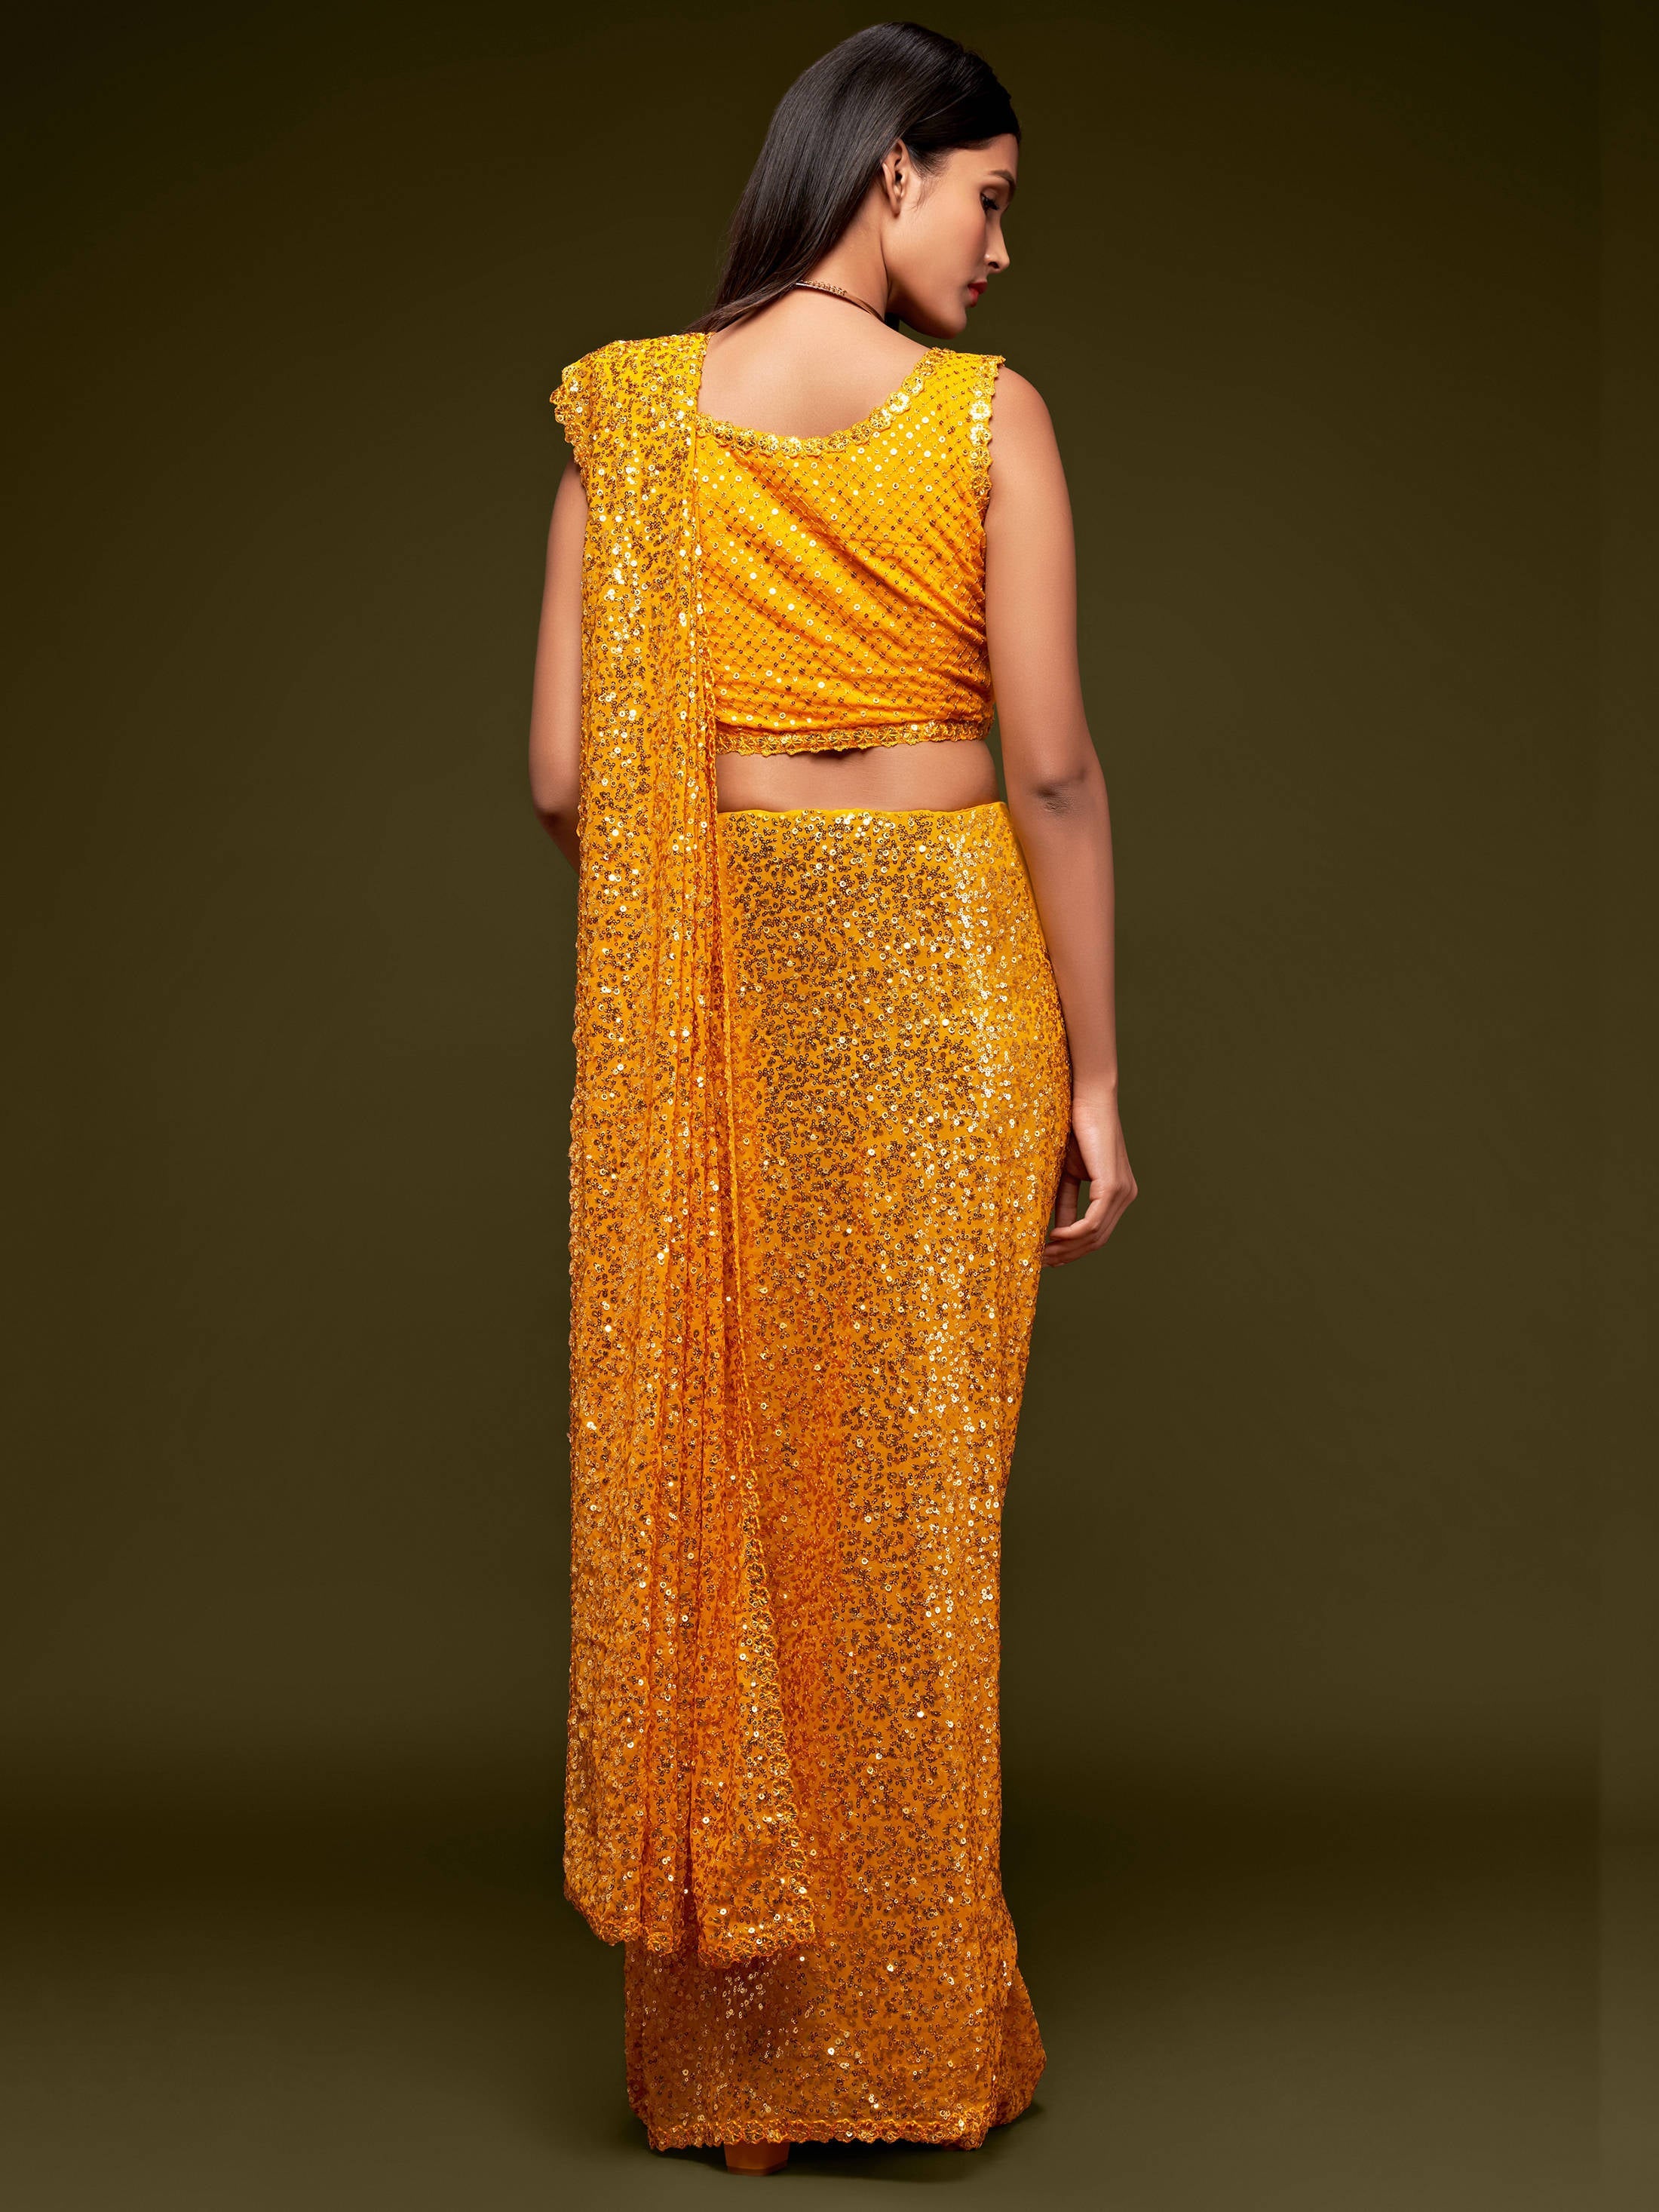 Lovely Honey Yellow Sequined Georgette Party Wear Saree